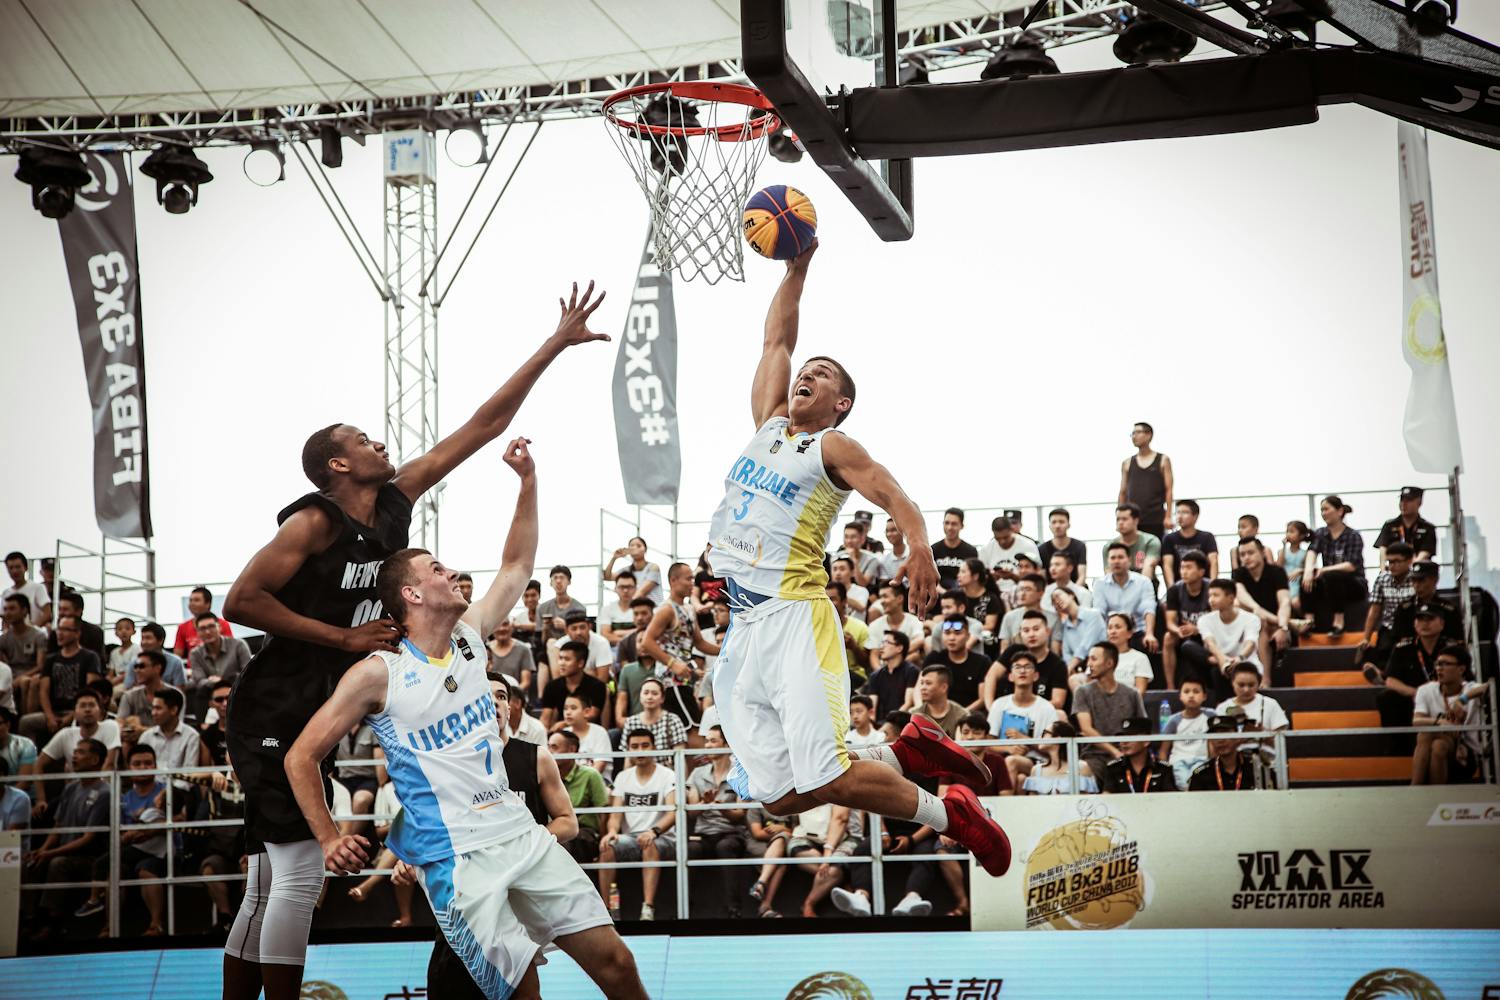 Top 5 Men to watch at the FIBA 3x3 U18 Europe Cup Qualifiers